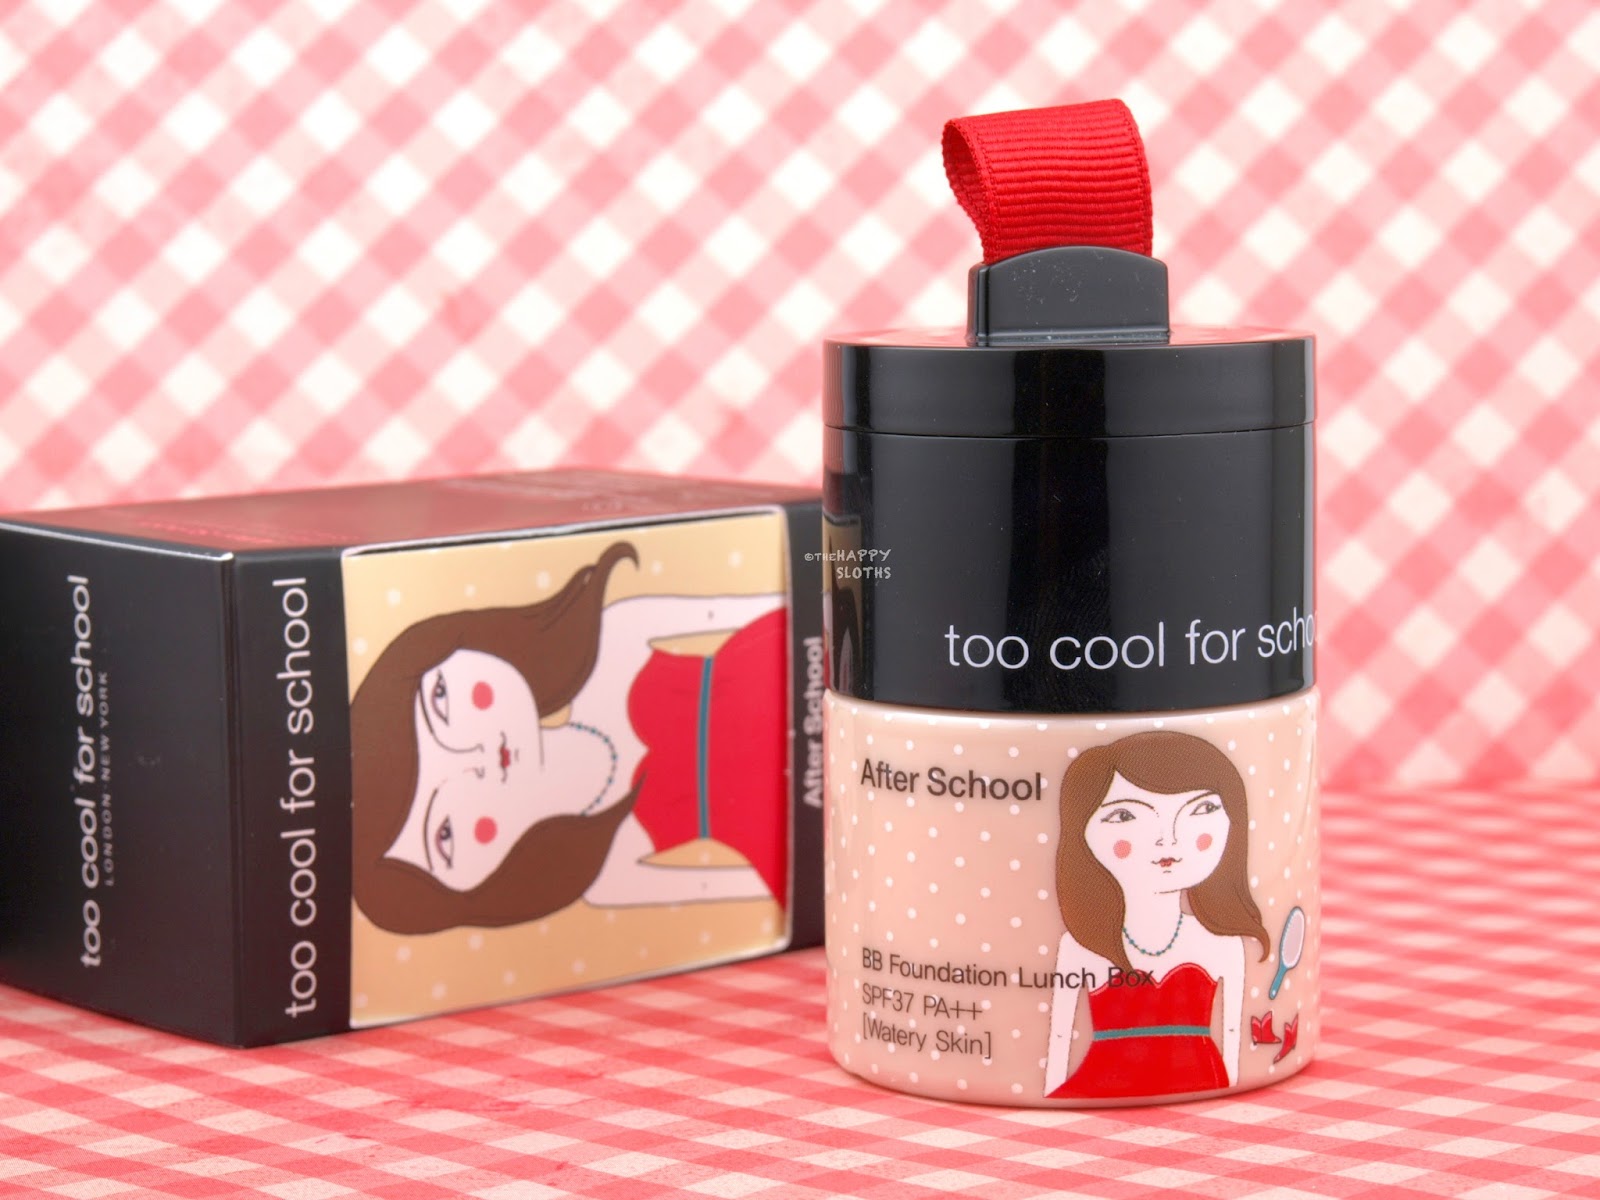 Too Cool For School | After School BB Foundation Lunch Box #2: Review and Swatches